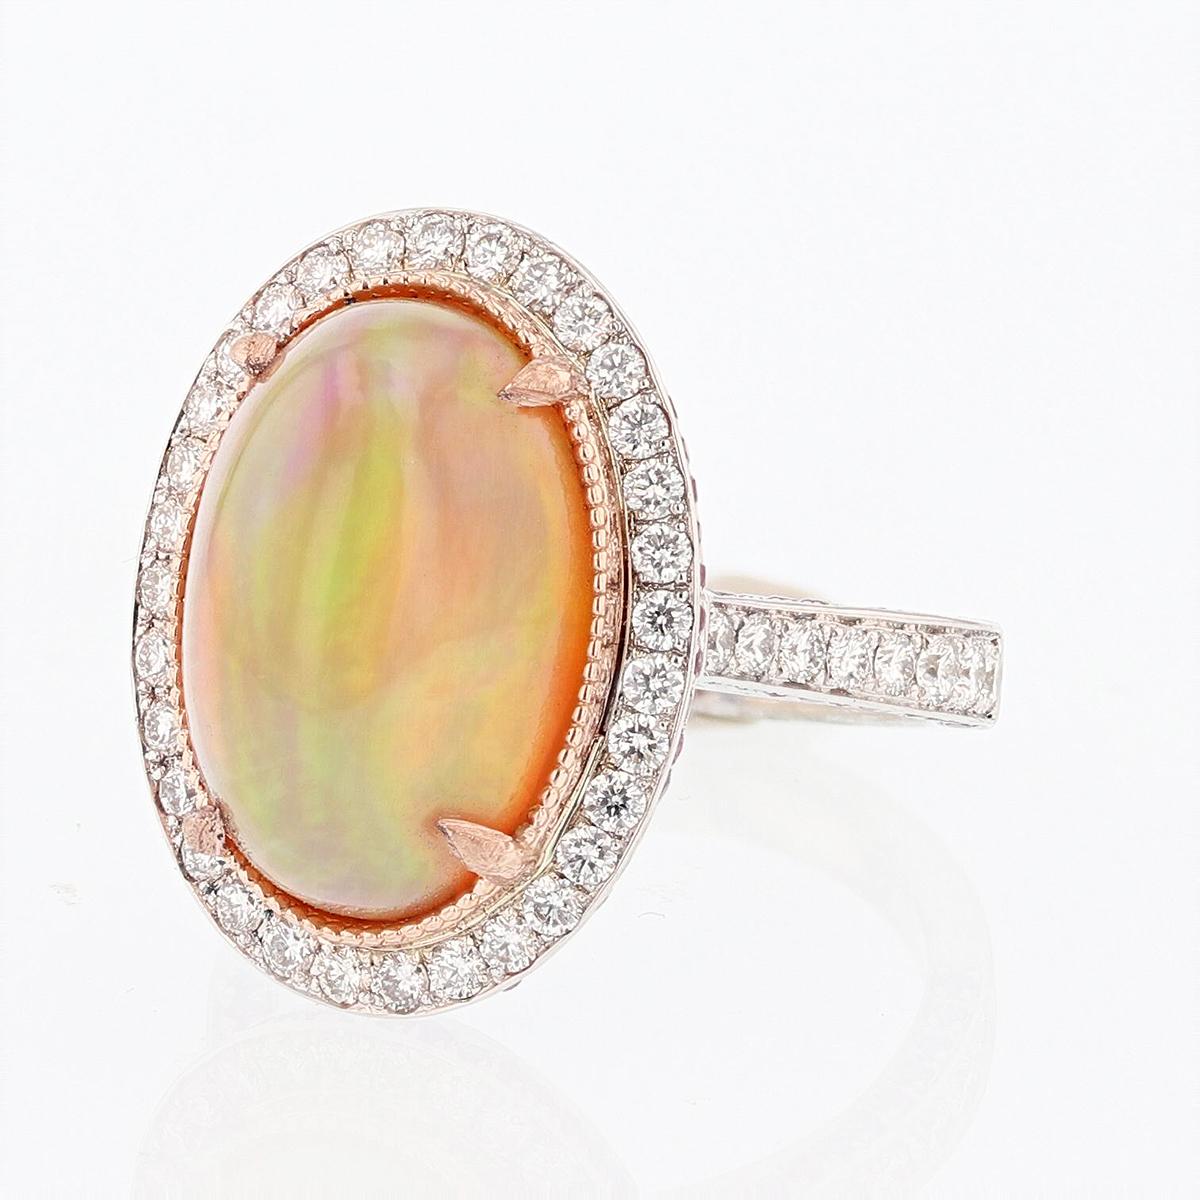 This ring is made with 14 karat white and rose gold and features an 5.89ct oval cut Opal and is surrounded by 100 pavé set round cut pink sapphires weighing 0.46ct and 48 round cut diamonds weighing 0.78ct with a color grade of (G) and a clarity of